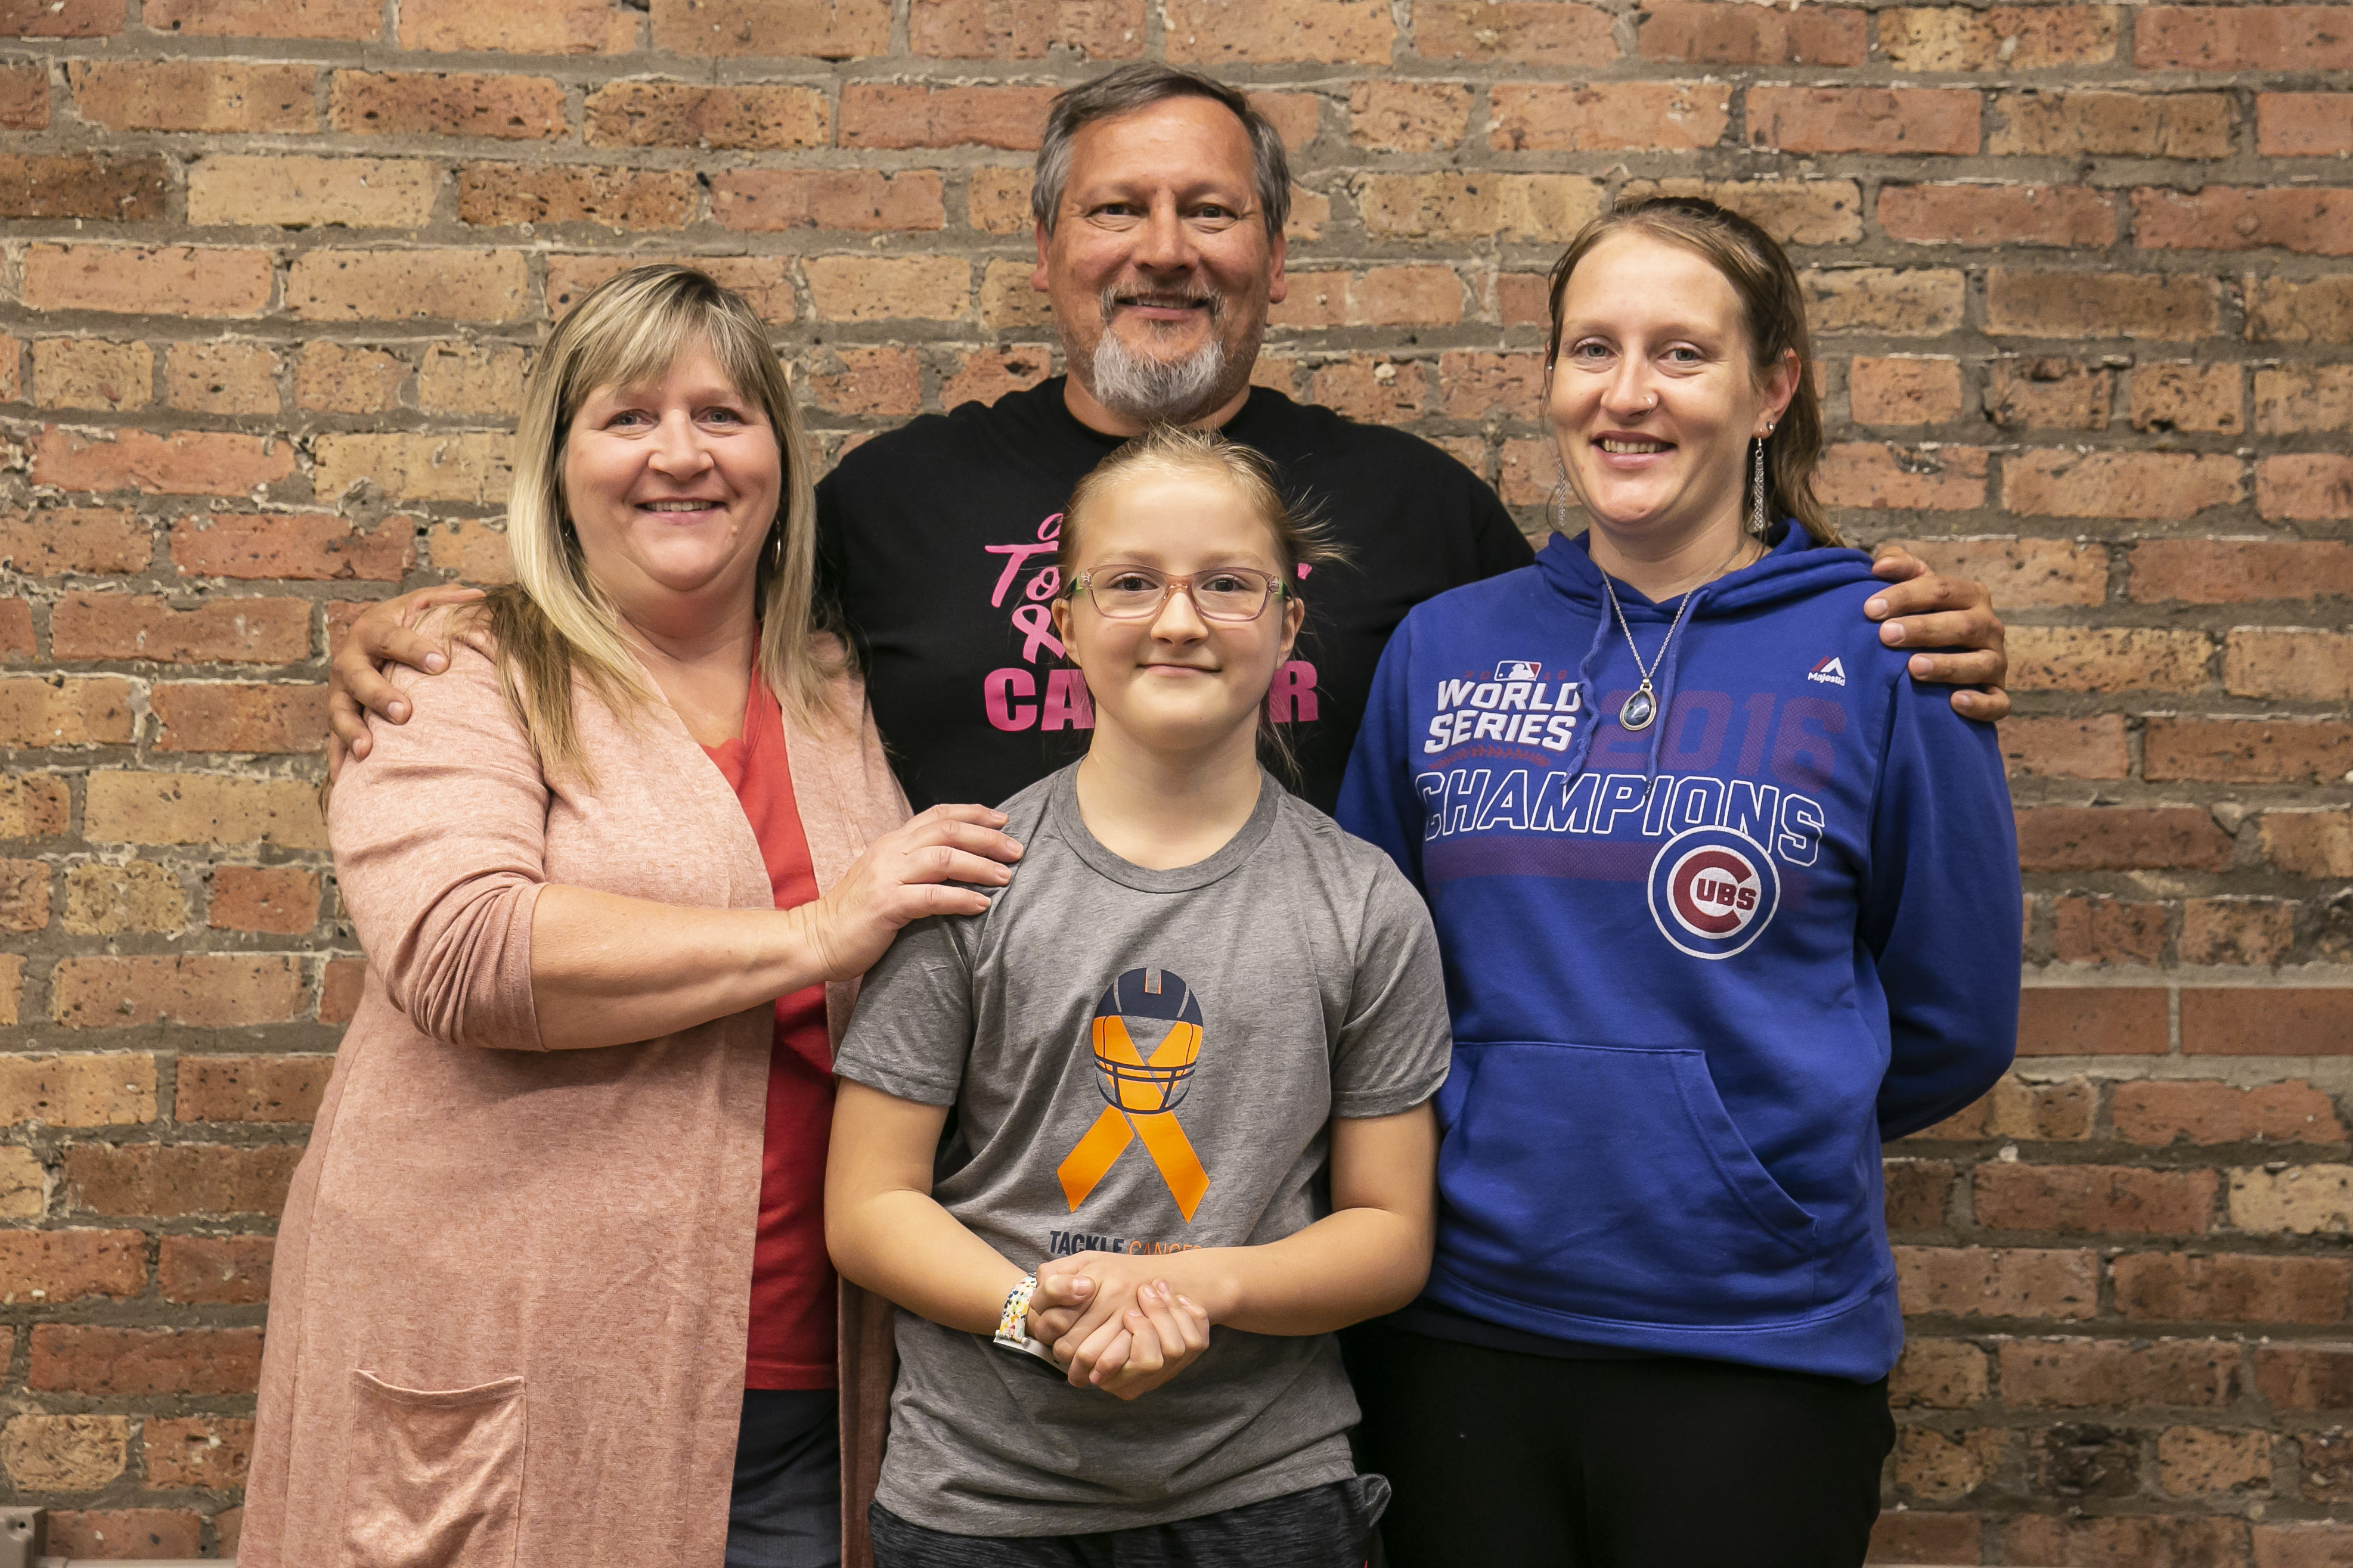 Caedyn Waxman,9, with, from left, Grandmother Tina Chesser, Grandfather Gene Chesser and Mom Courtney Chesser. | Rich Hein/Sun-Times